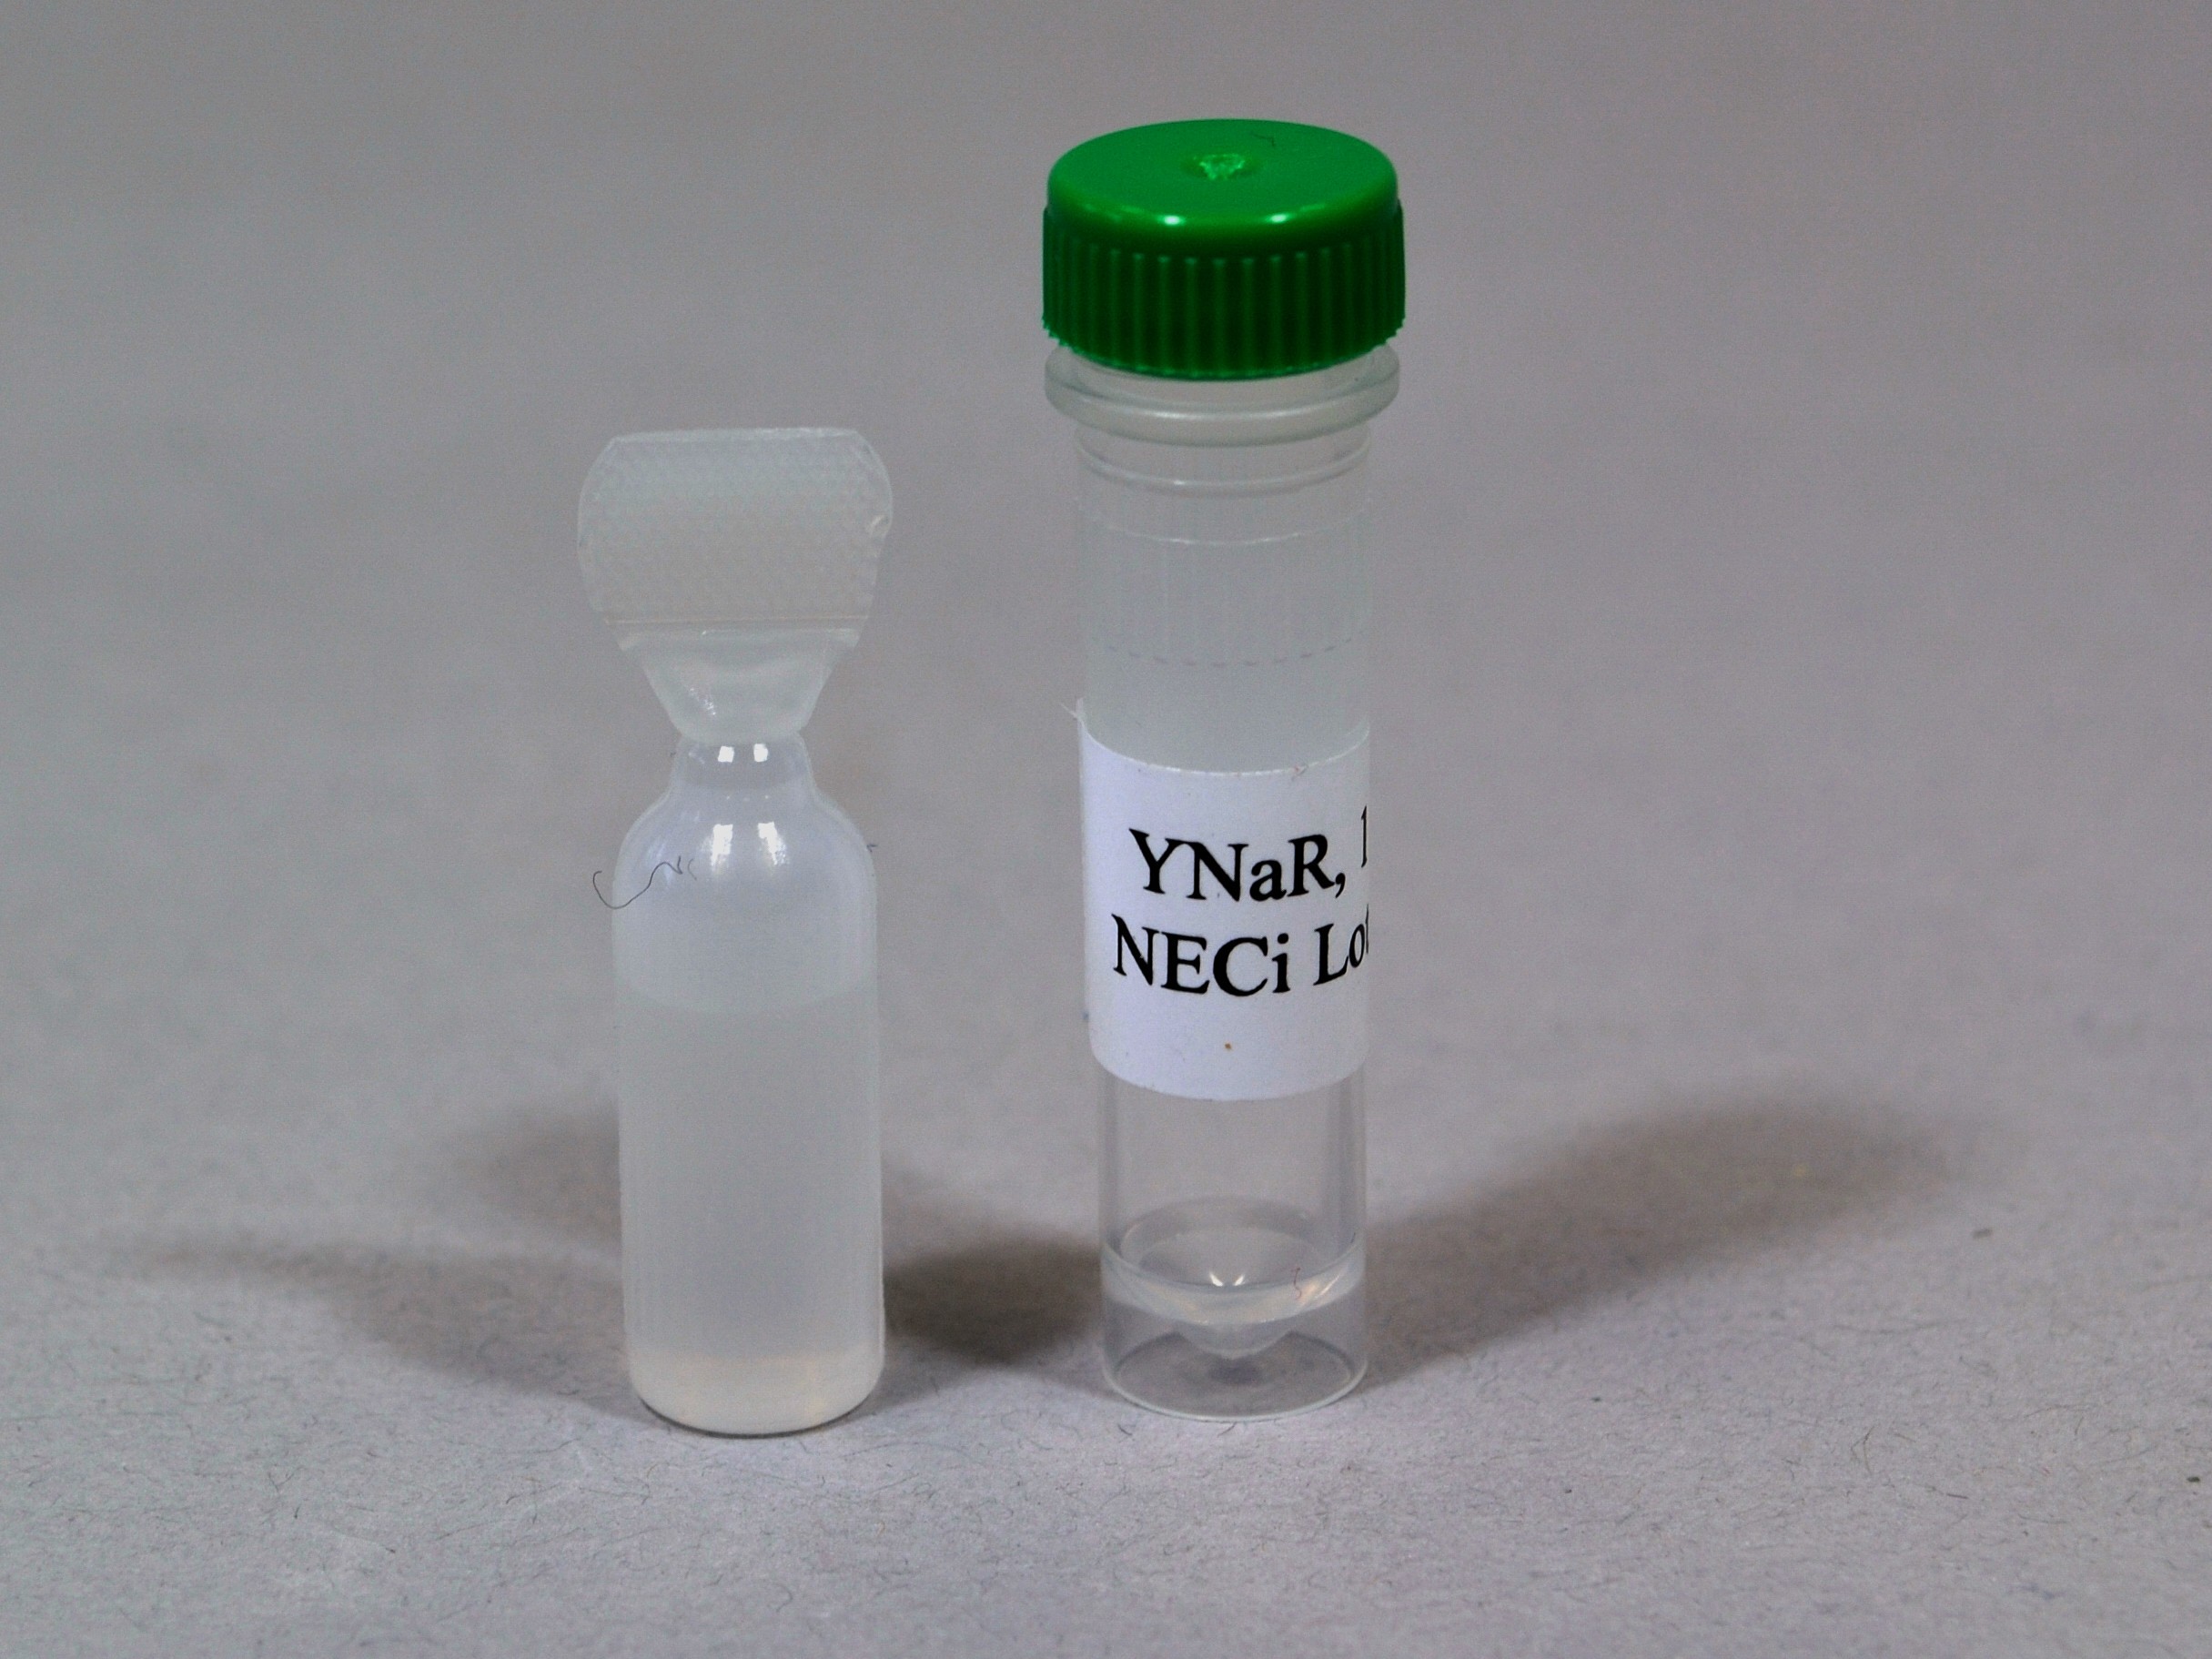 Nitrate Reductace: YNar 2.0 units